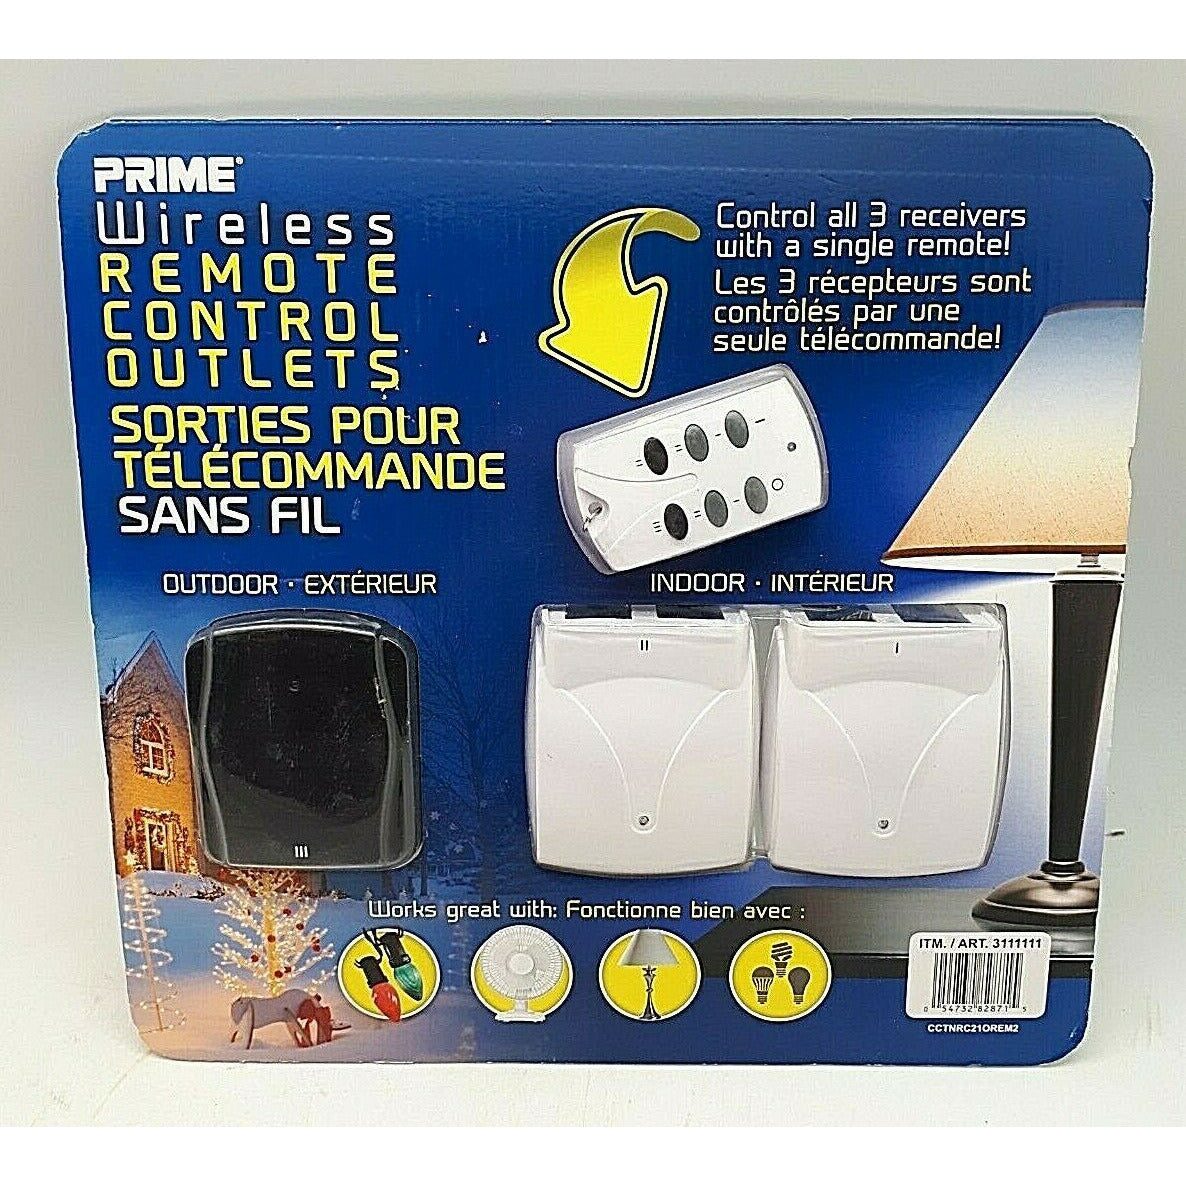 Prime Wireless Indoor/Outdoor remote controlled outlets in a pack of 3